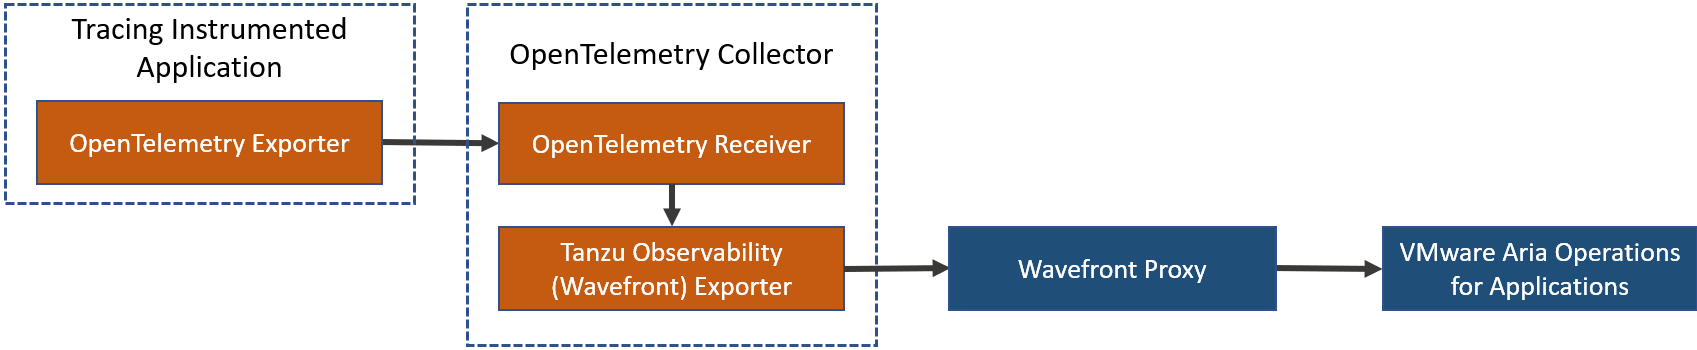 A data flow diagram that shows how the data flows from your application to the collector, to the proxy, and then to Operations for Applications